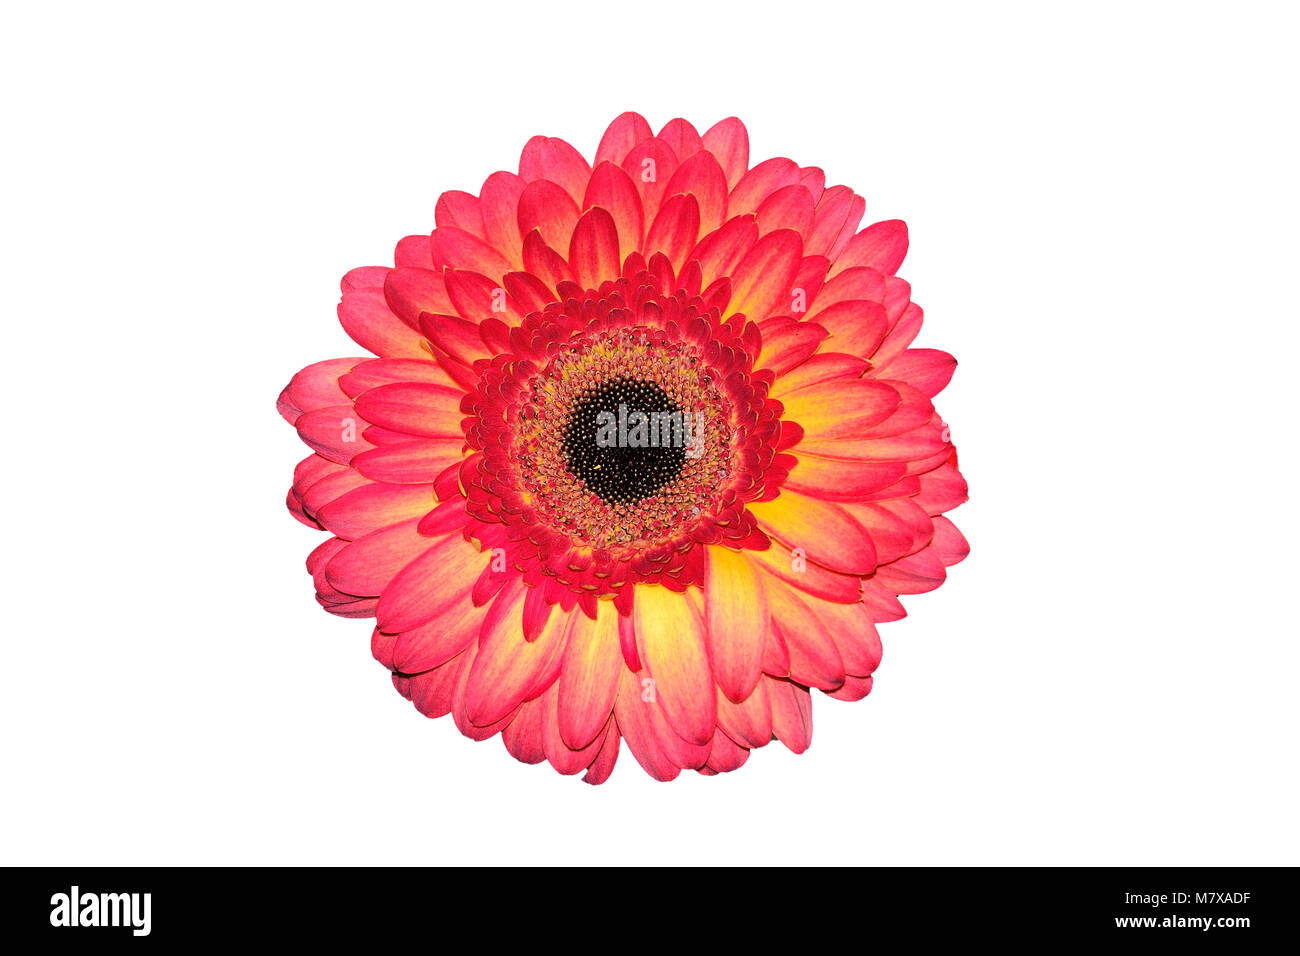 Pink with yellow head of gerbera flower or transvaal daisy close up, isolated on a white background Stock Photo